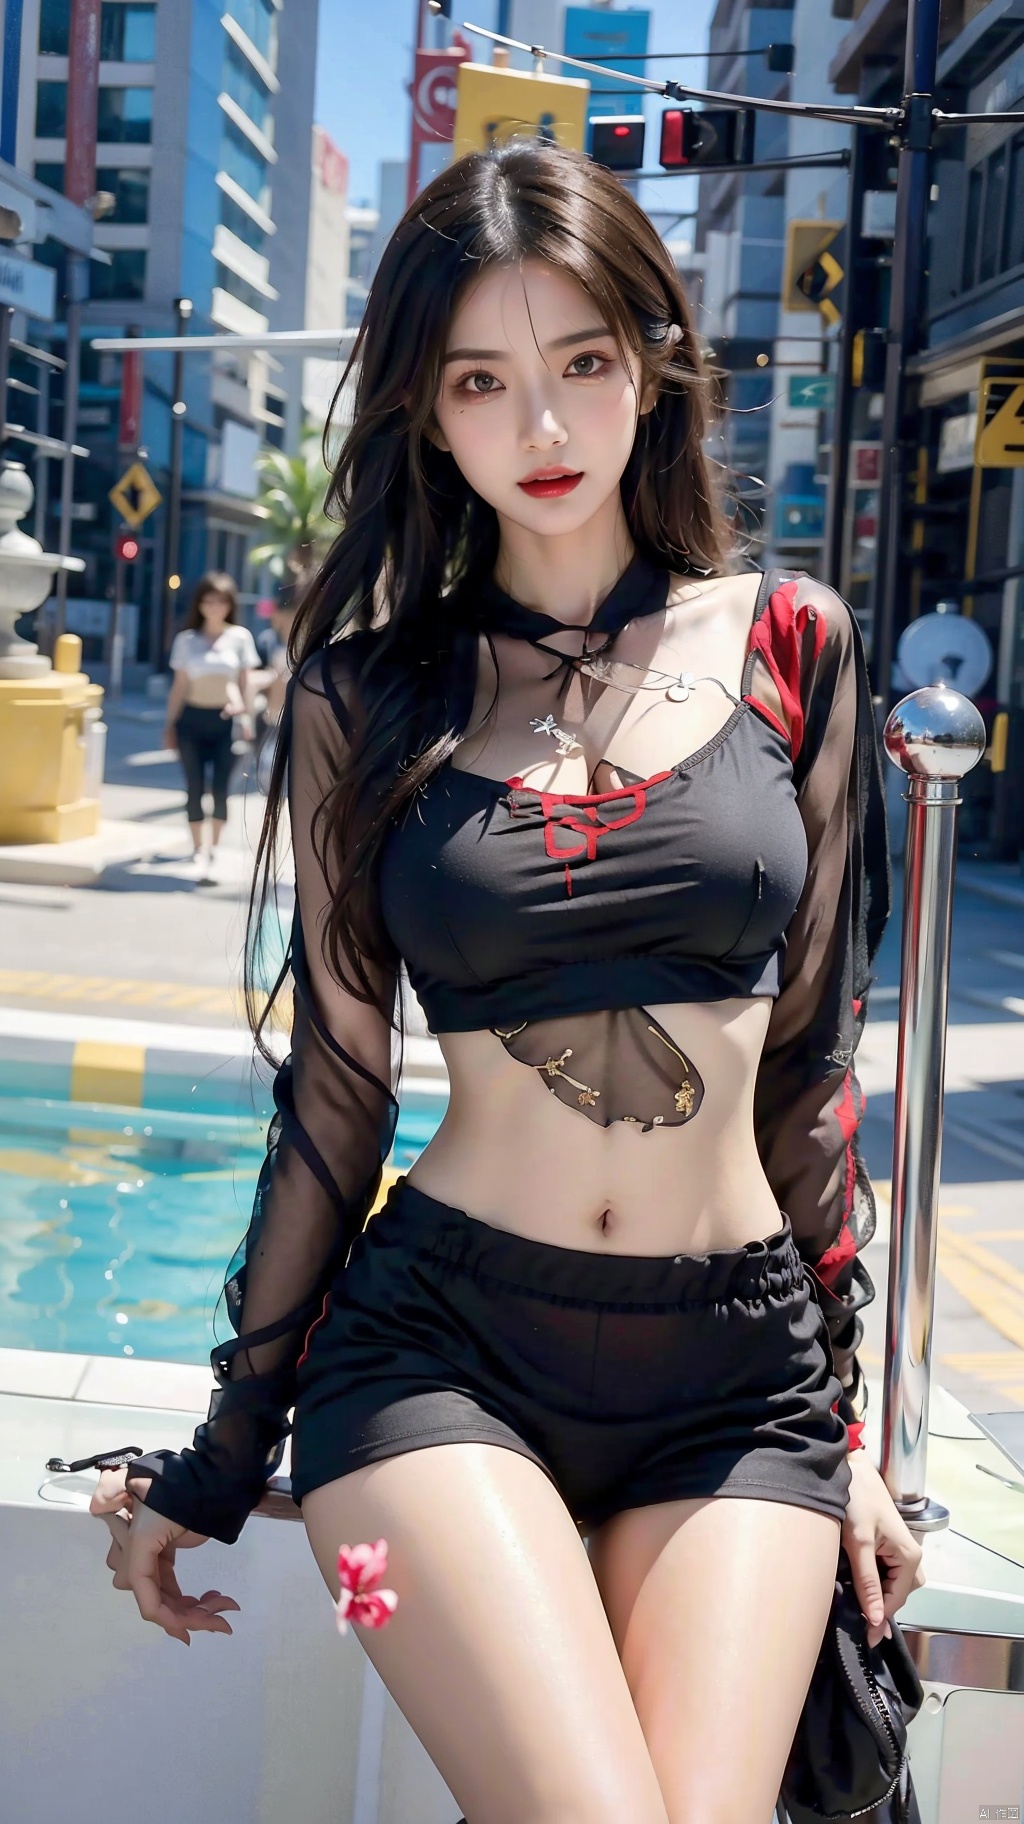  1girl, Half body,large breasts,temptation,aoa,midriff,Thighs,see-through,police uniform,Hourglass body shape